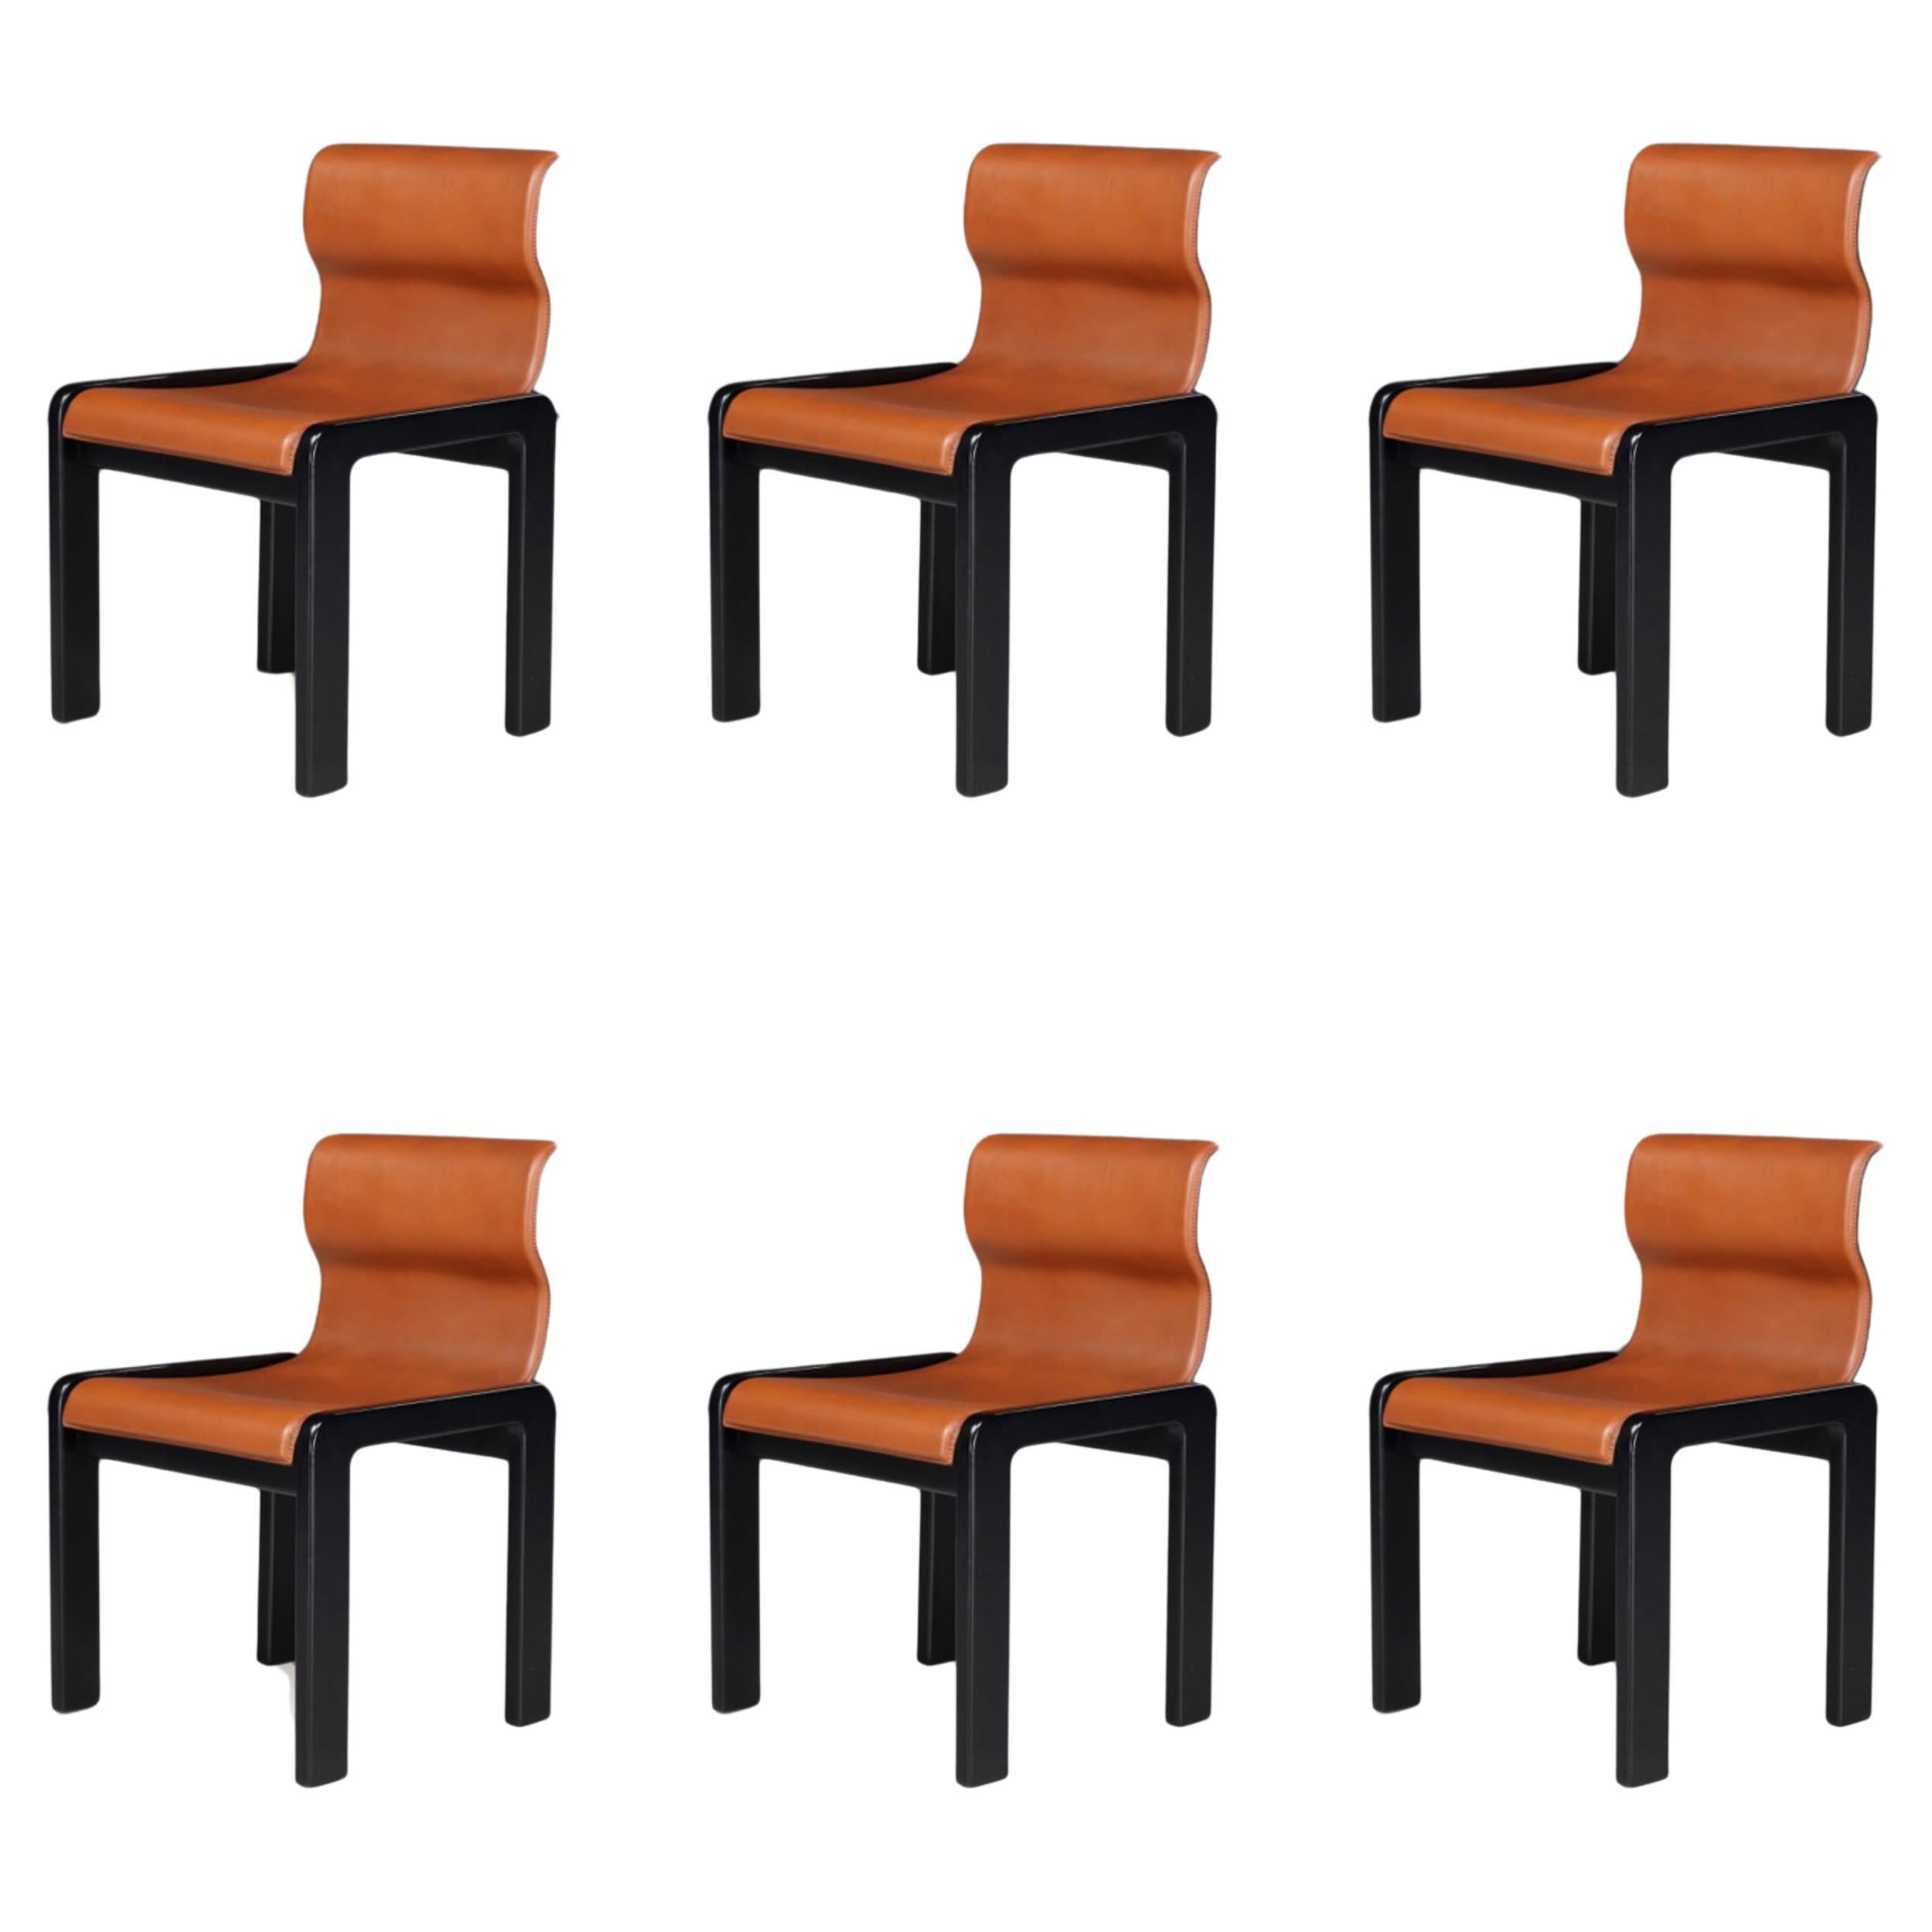 Afra & Tobia Scarpa set of six Dining Room Chairs in Cognac Leather, Italy 1966 For Sale